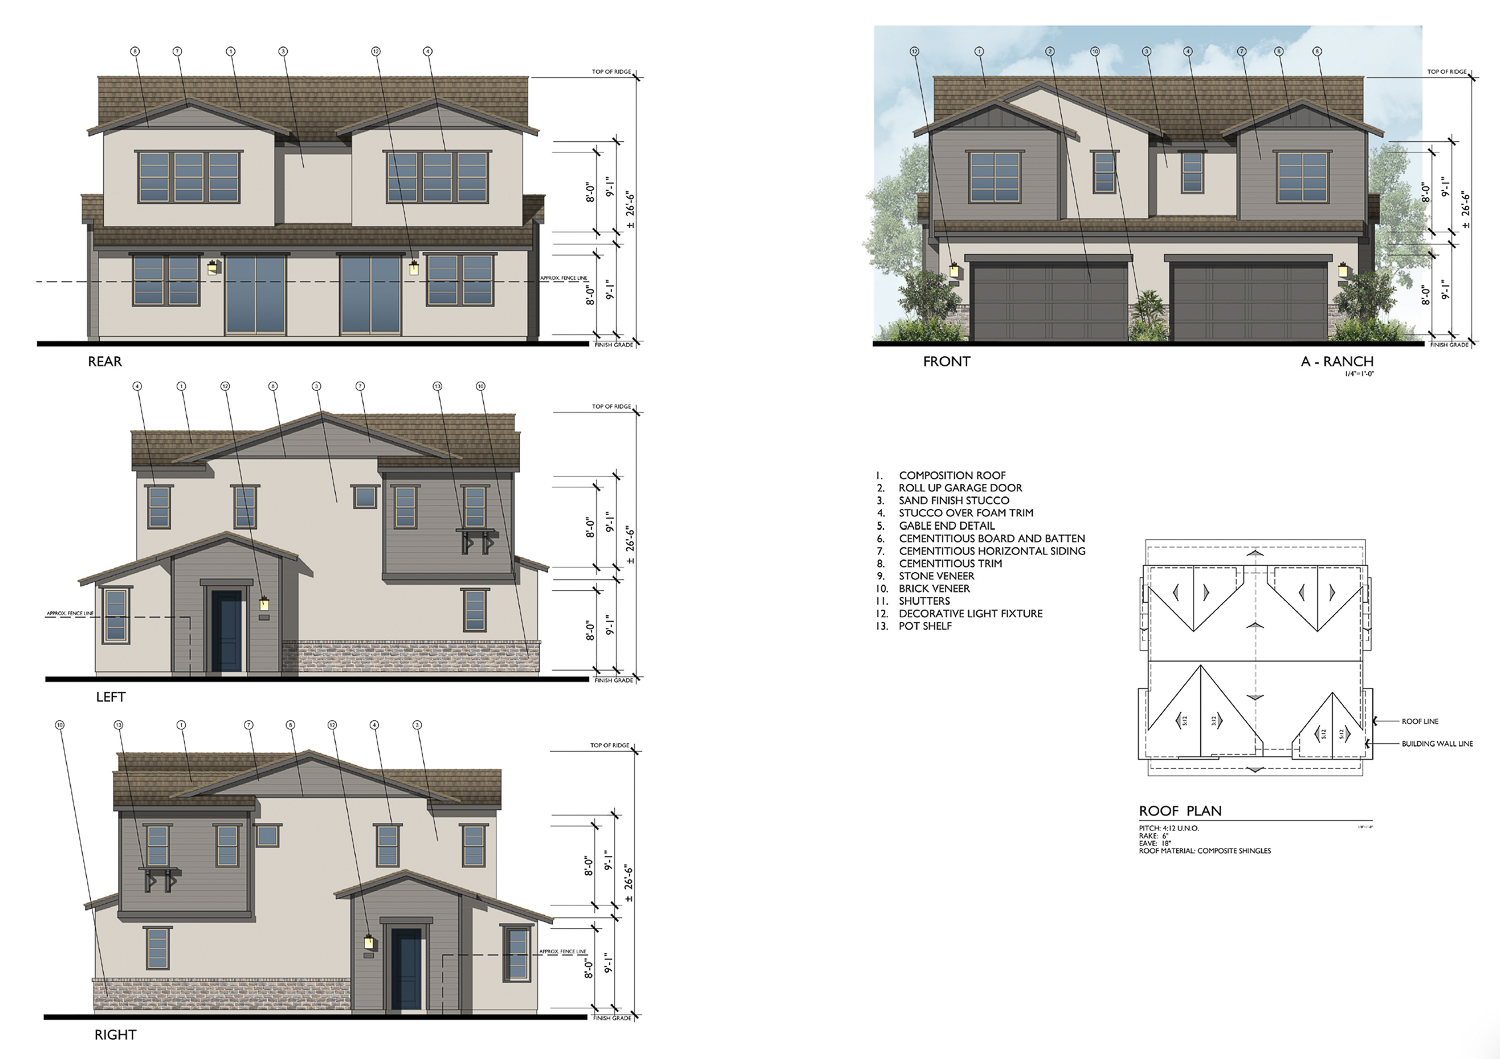 15395 Sycamore Drive duplex elevation, illustration by Bassenian Lagoni Architecture + Planning